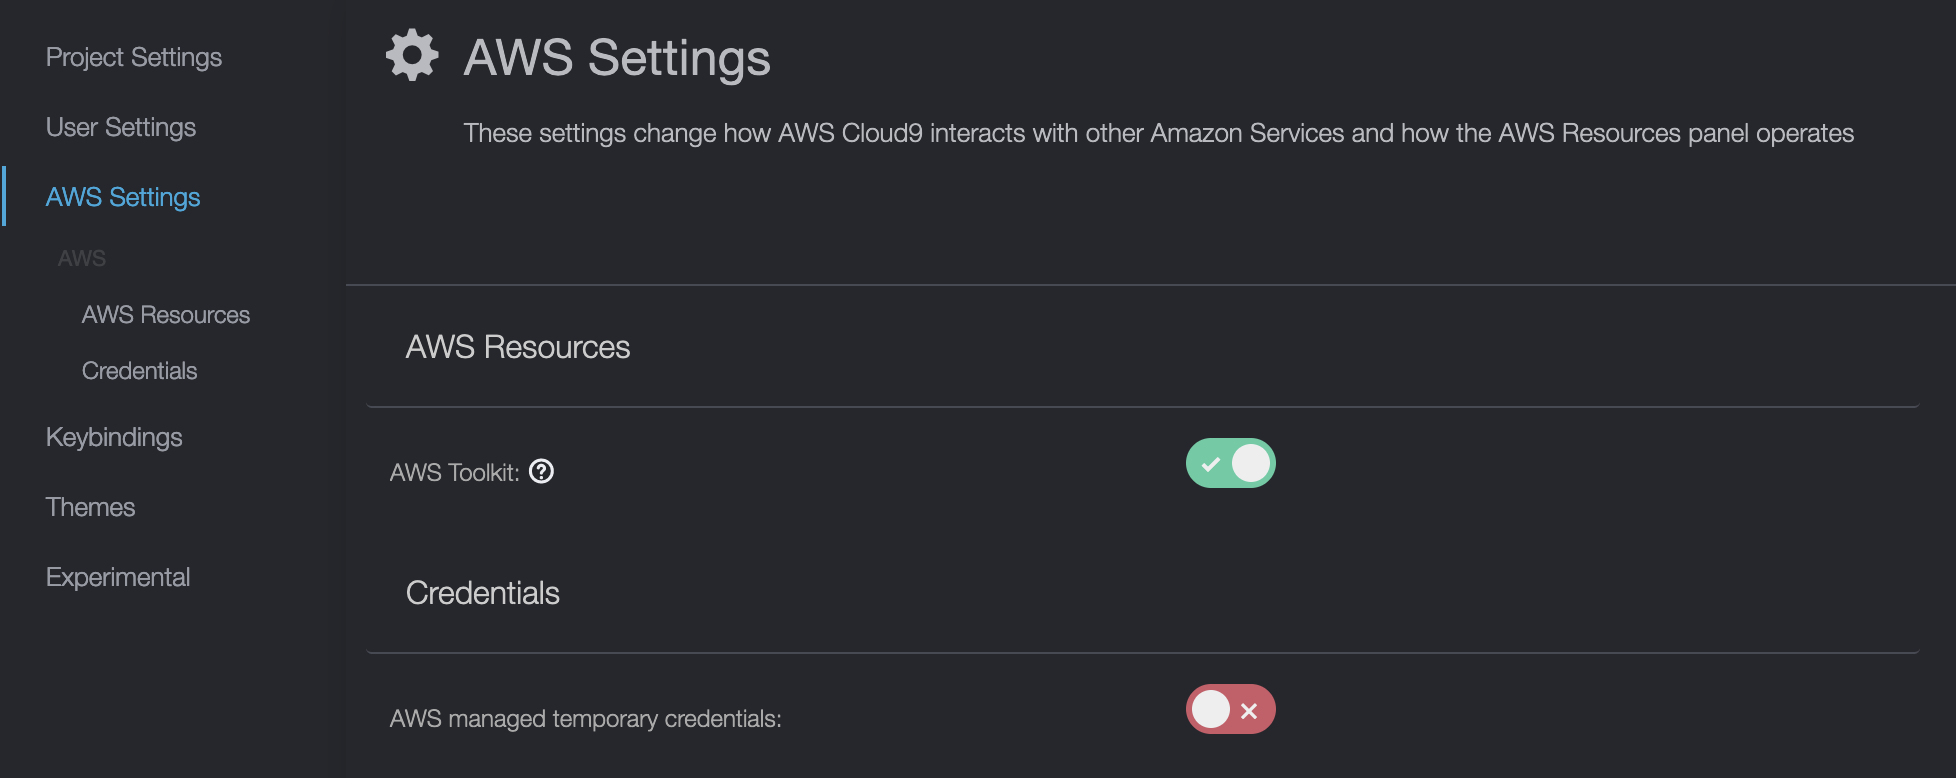 _images/_preferences-aws_settings.png